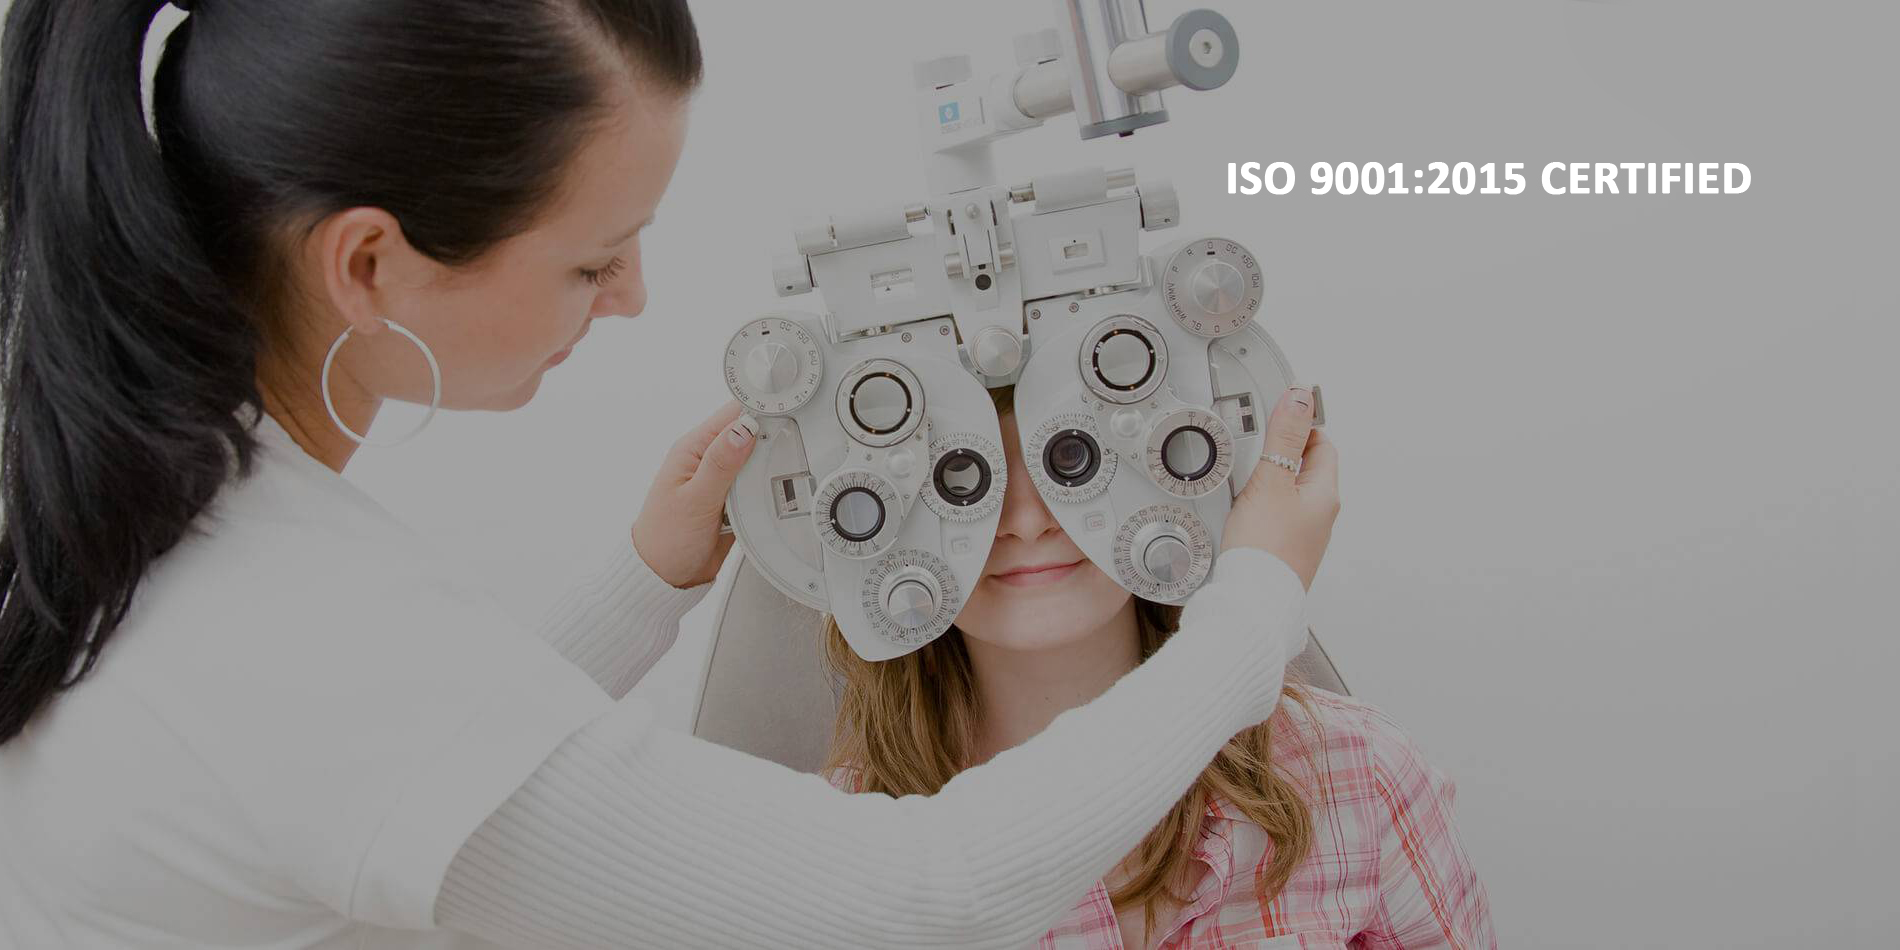 Super Speciality Eye Hospitals in Bangalore